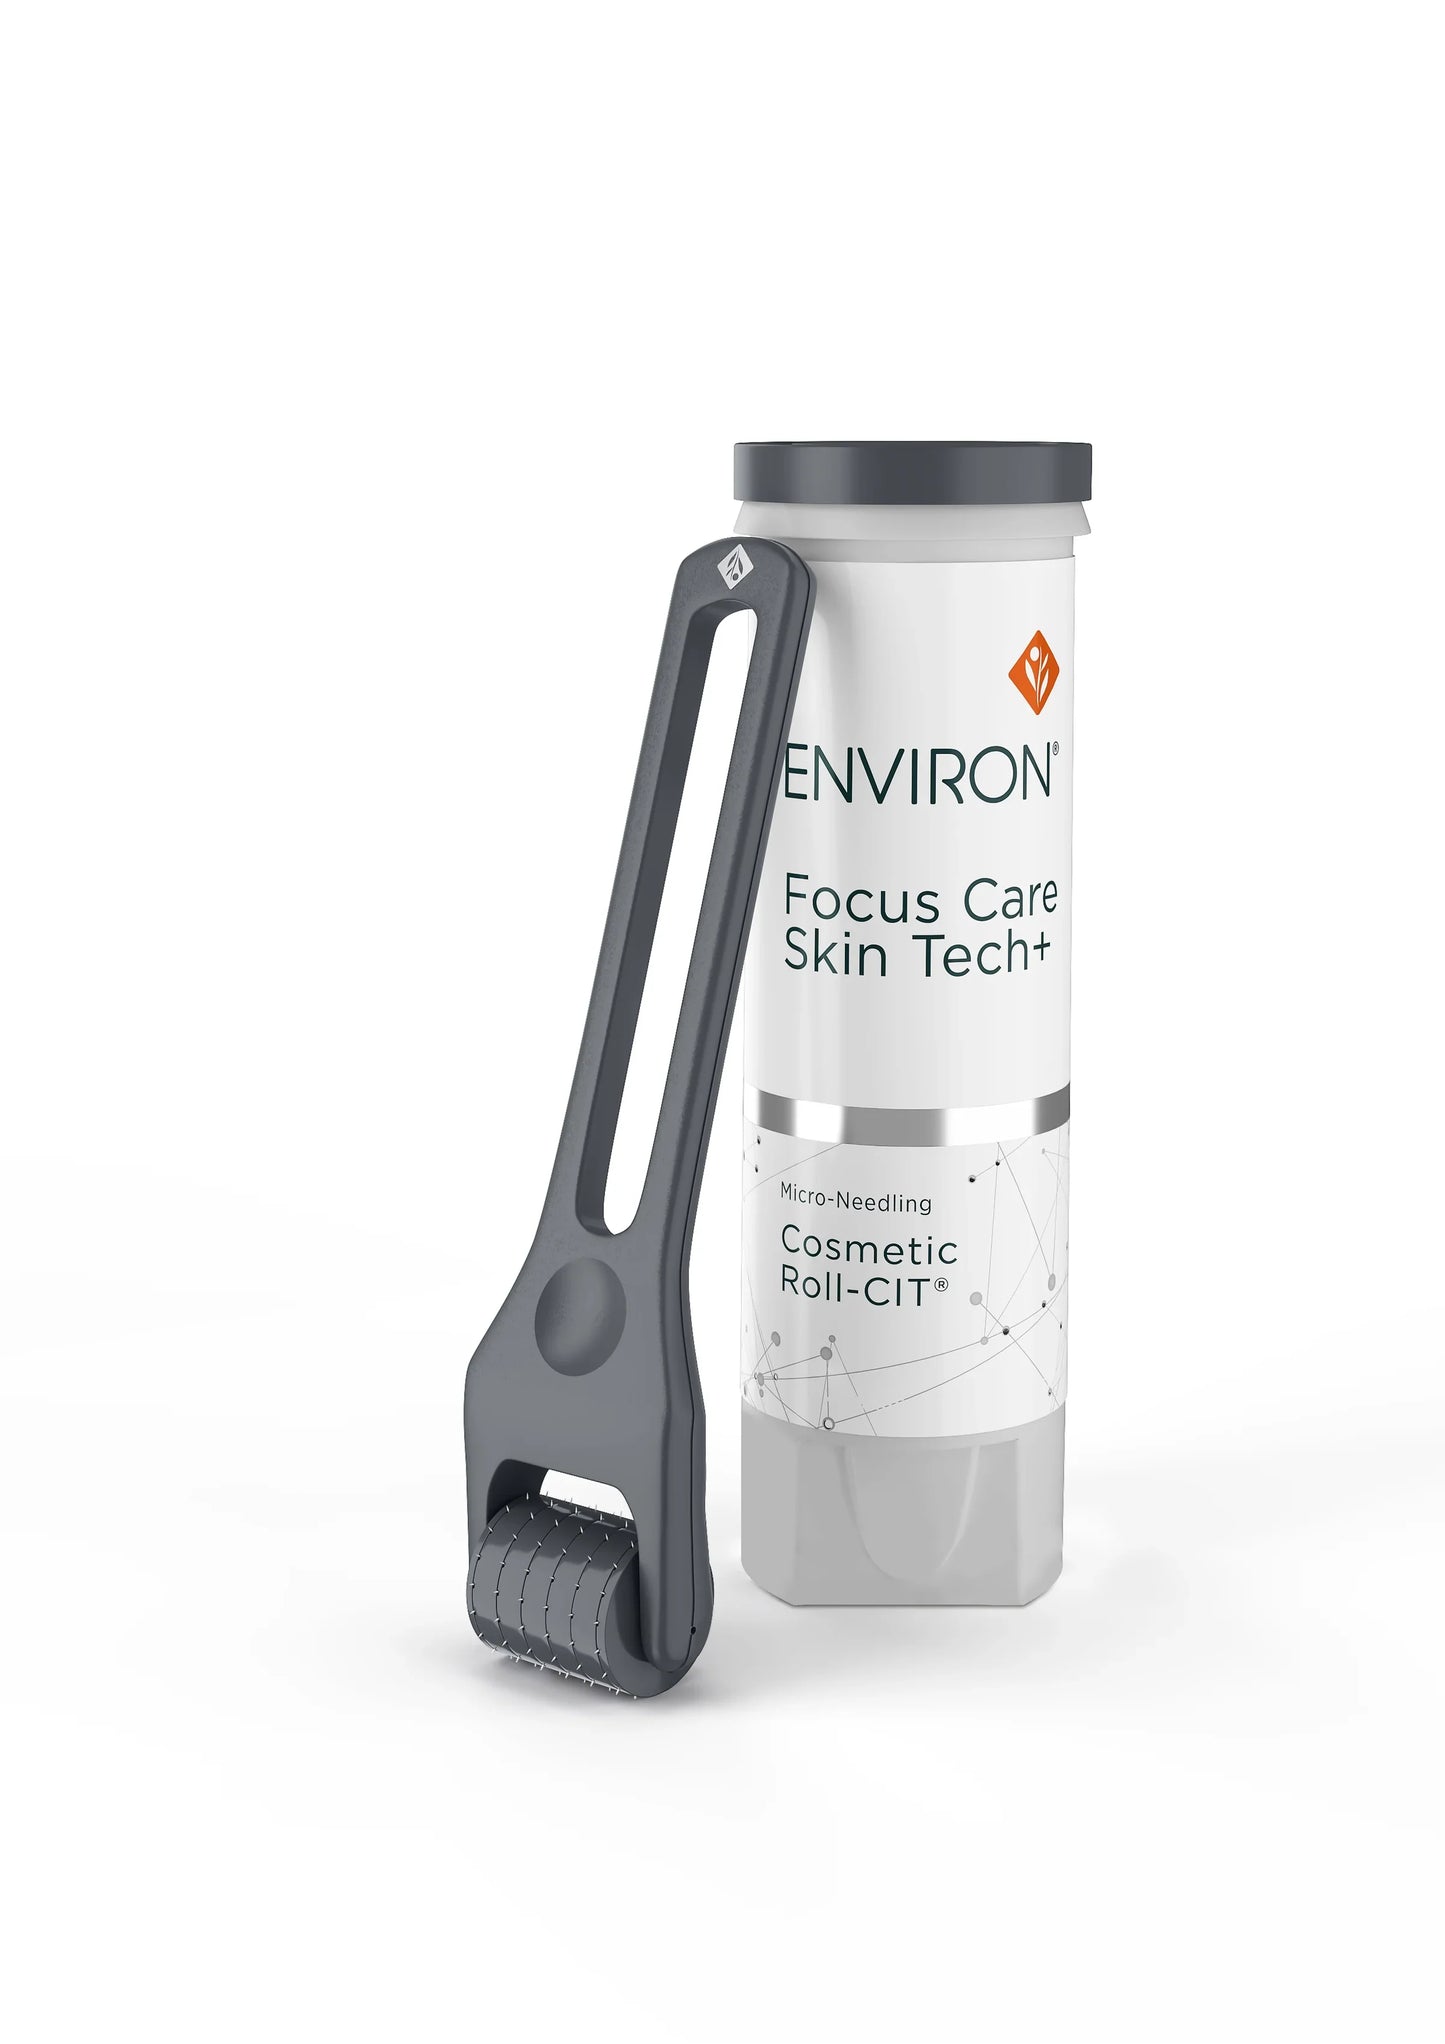 Environ Focus Care Skin Tech+ Micro-Needling Cosmetic Roll-CIT CureDeRepos